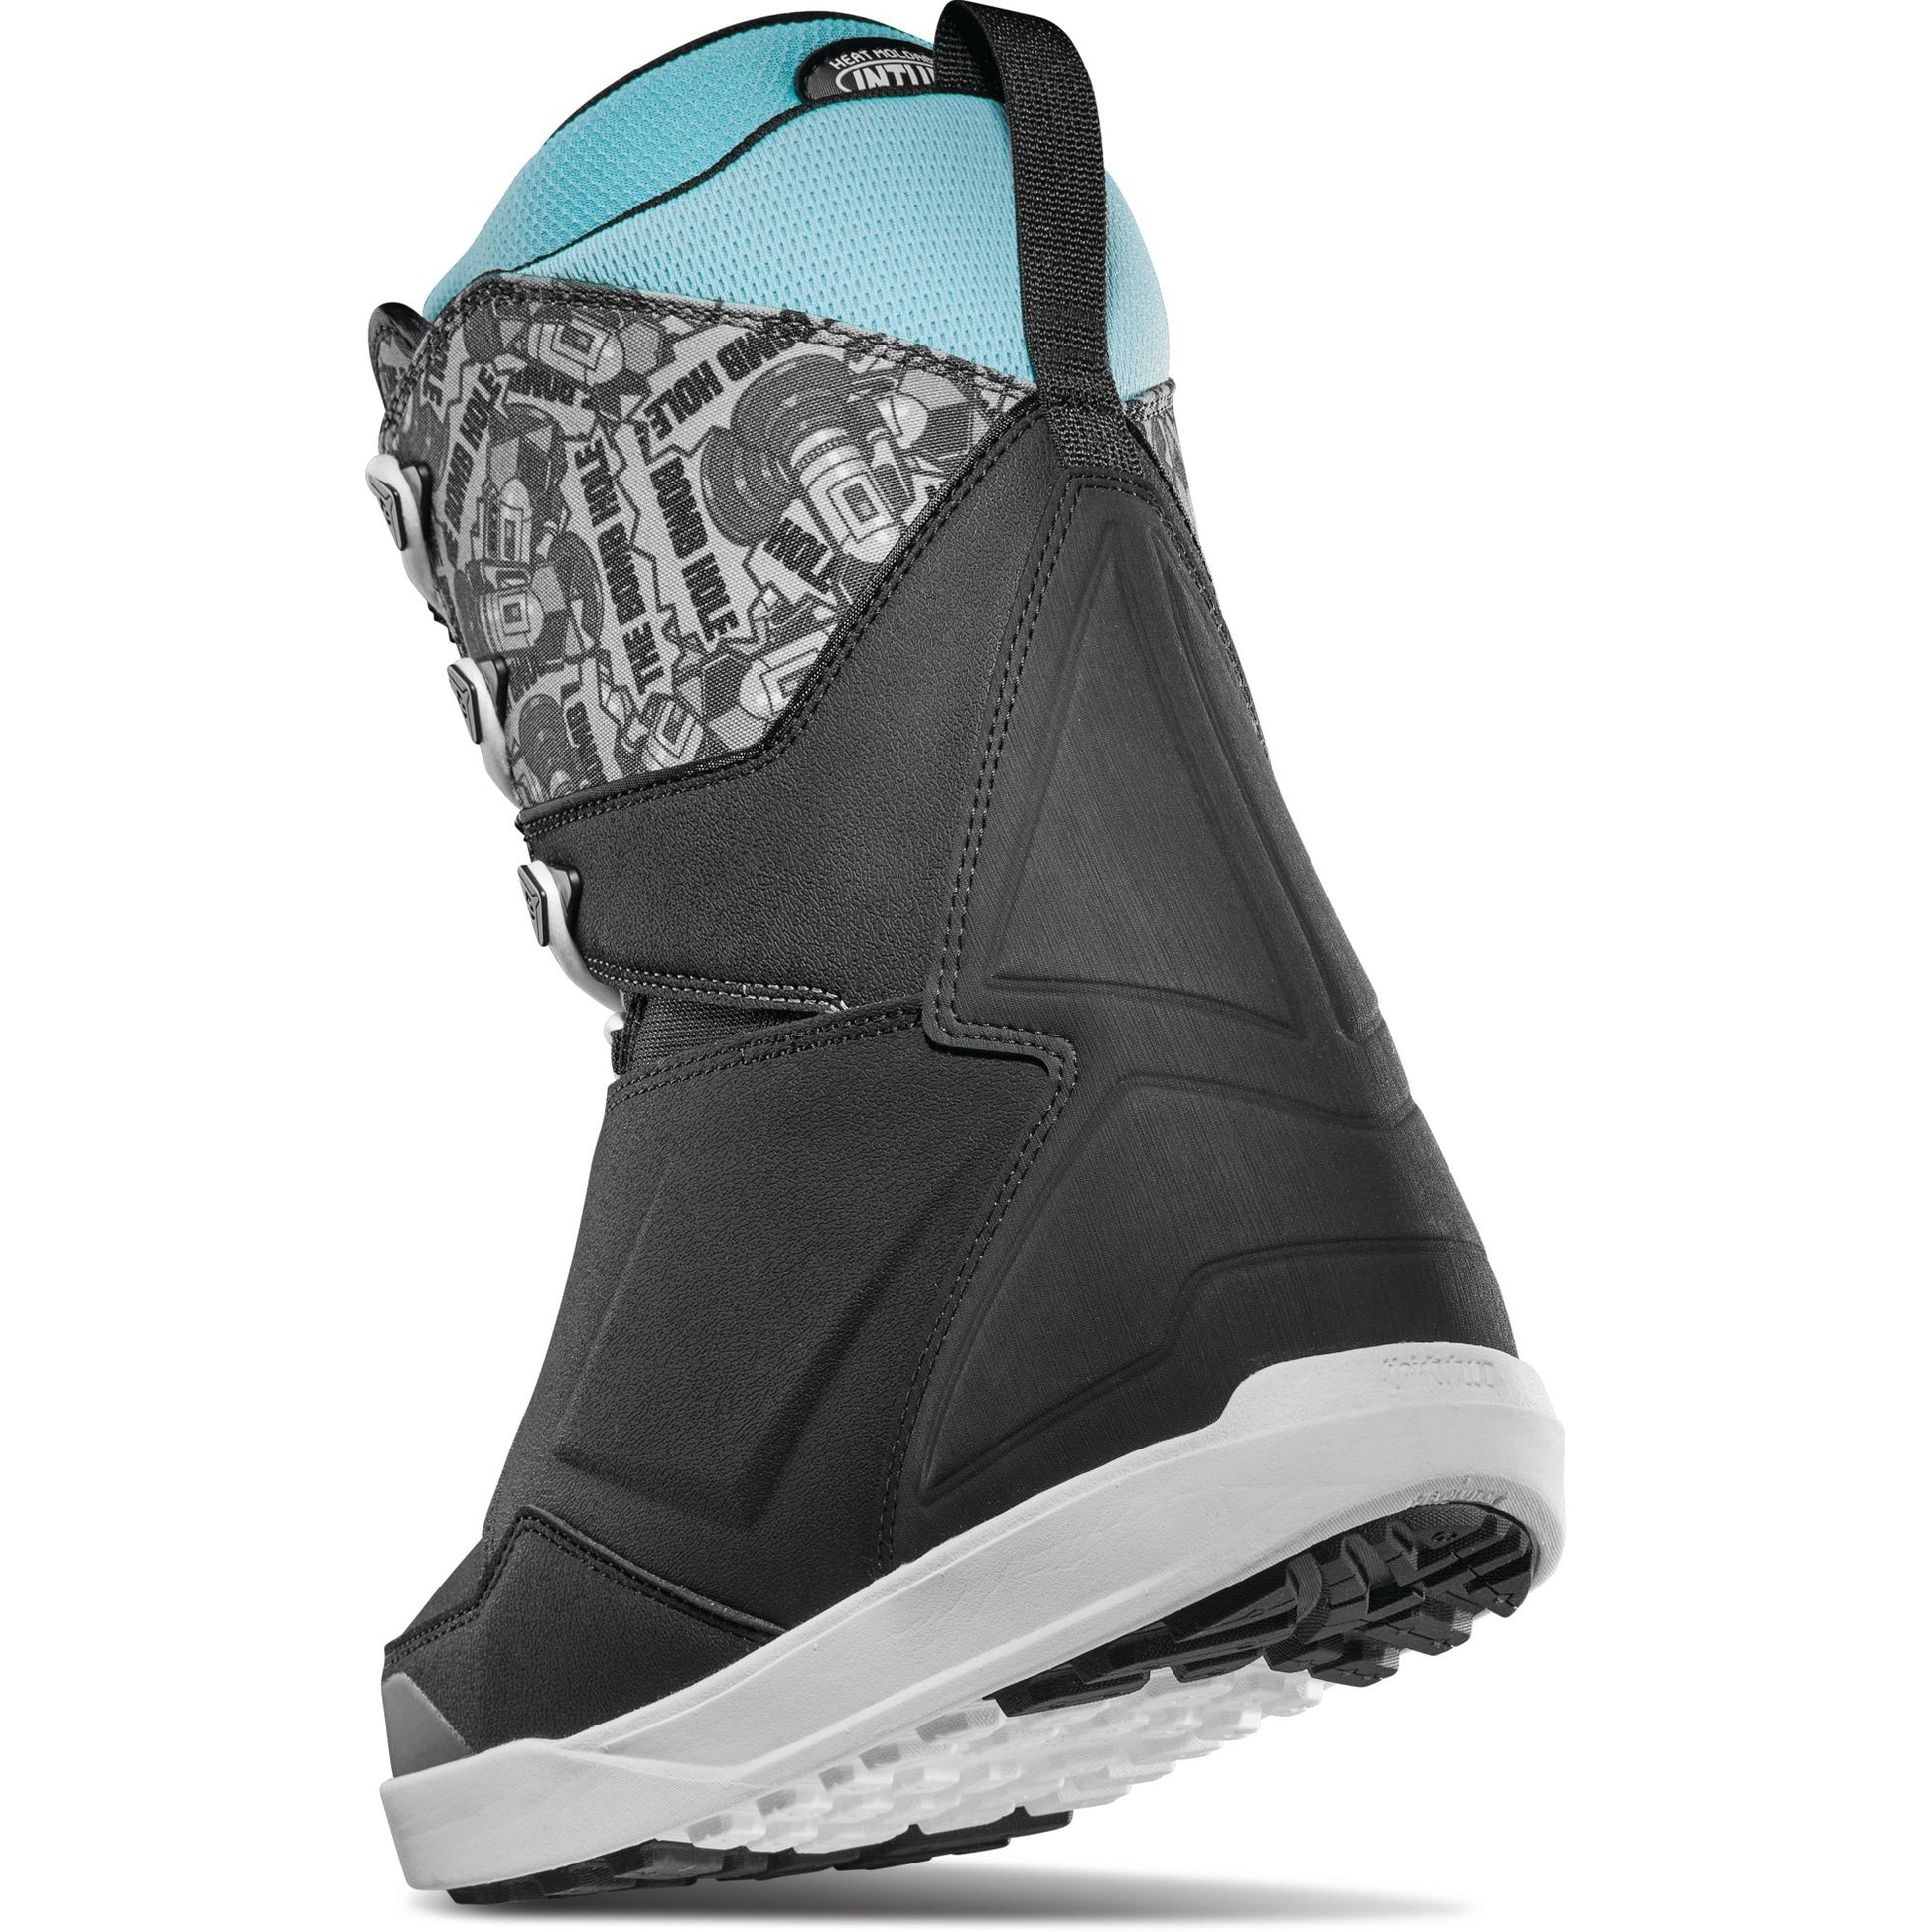 ThirtyTwo Lashed Bomb Hole Snowboard Boots Black White Snowboard Boots